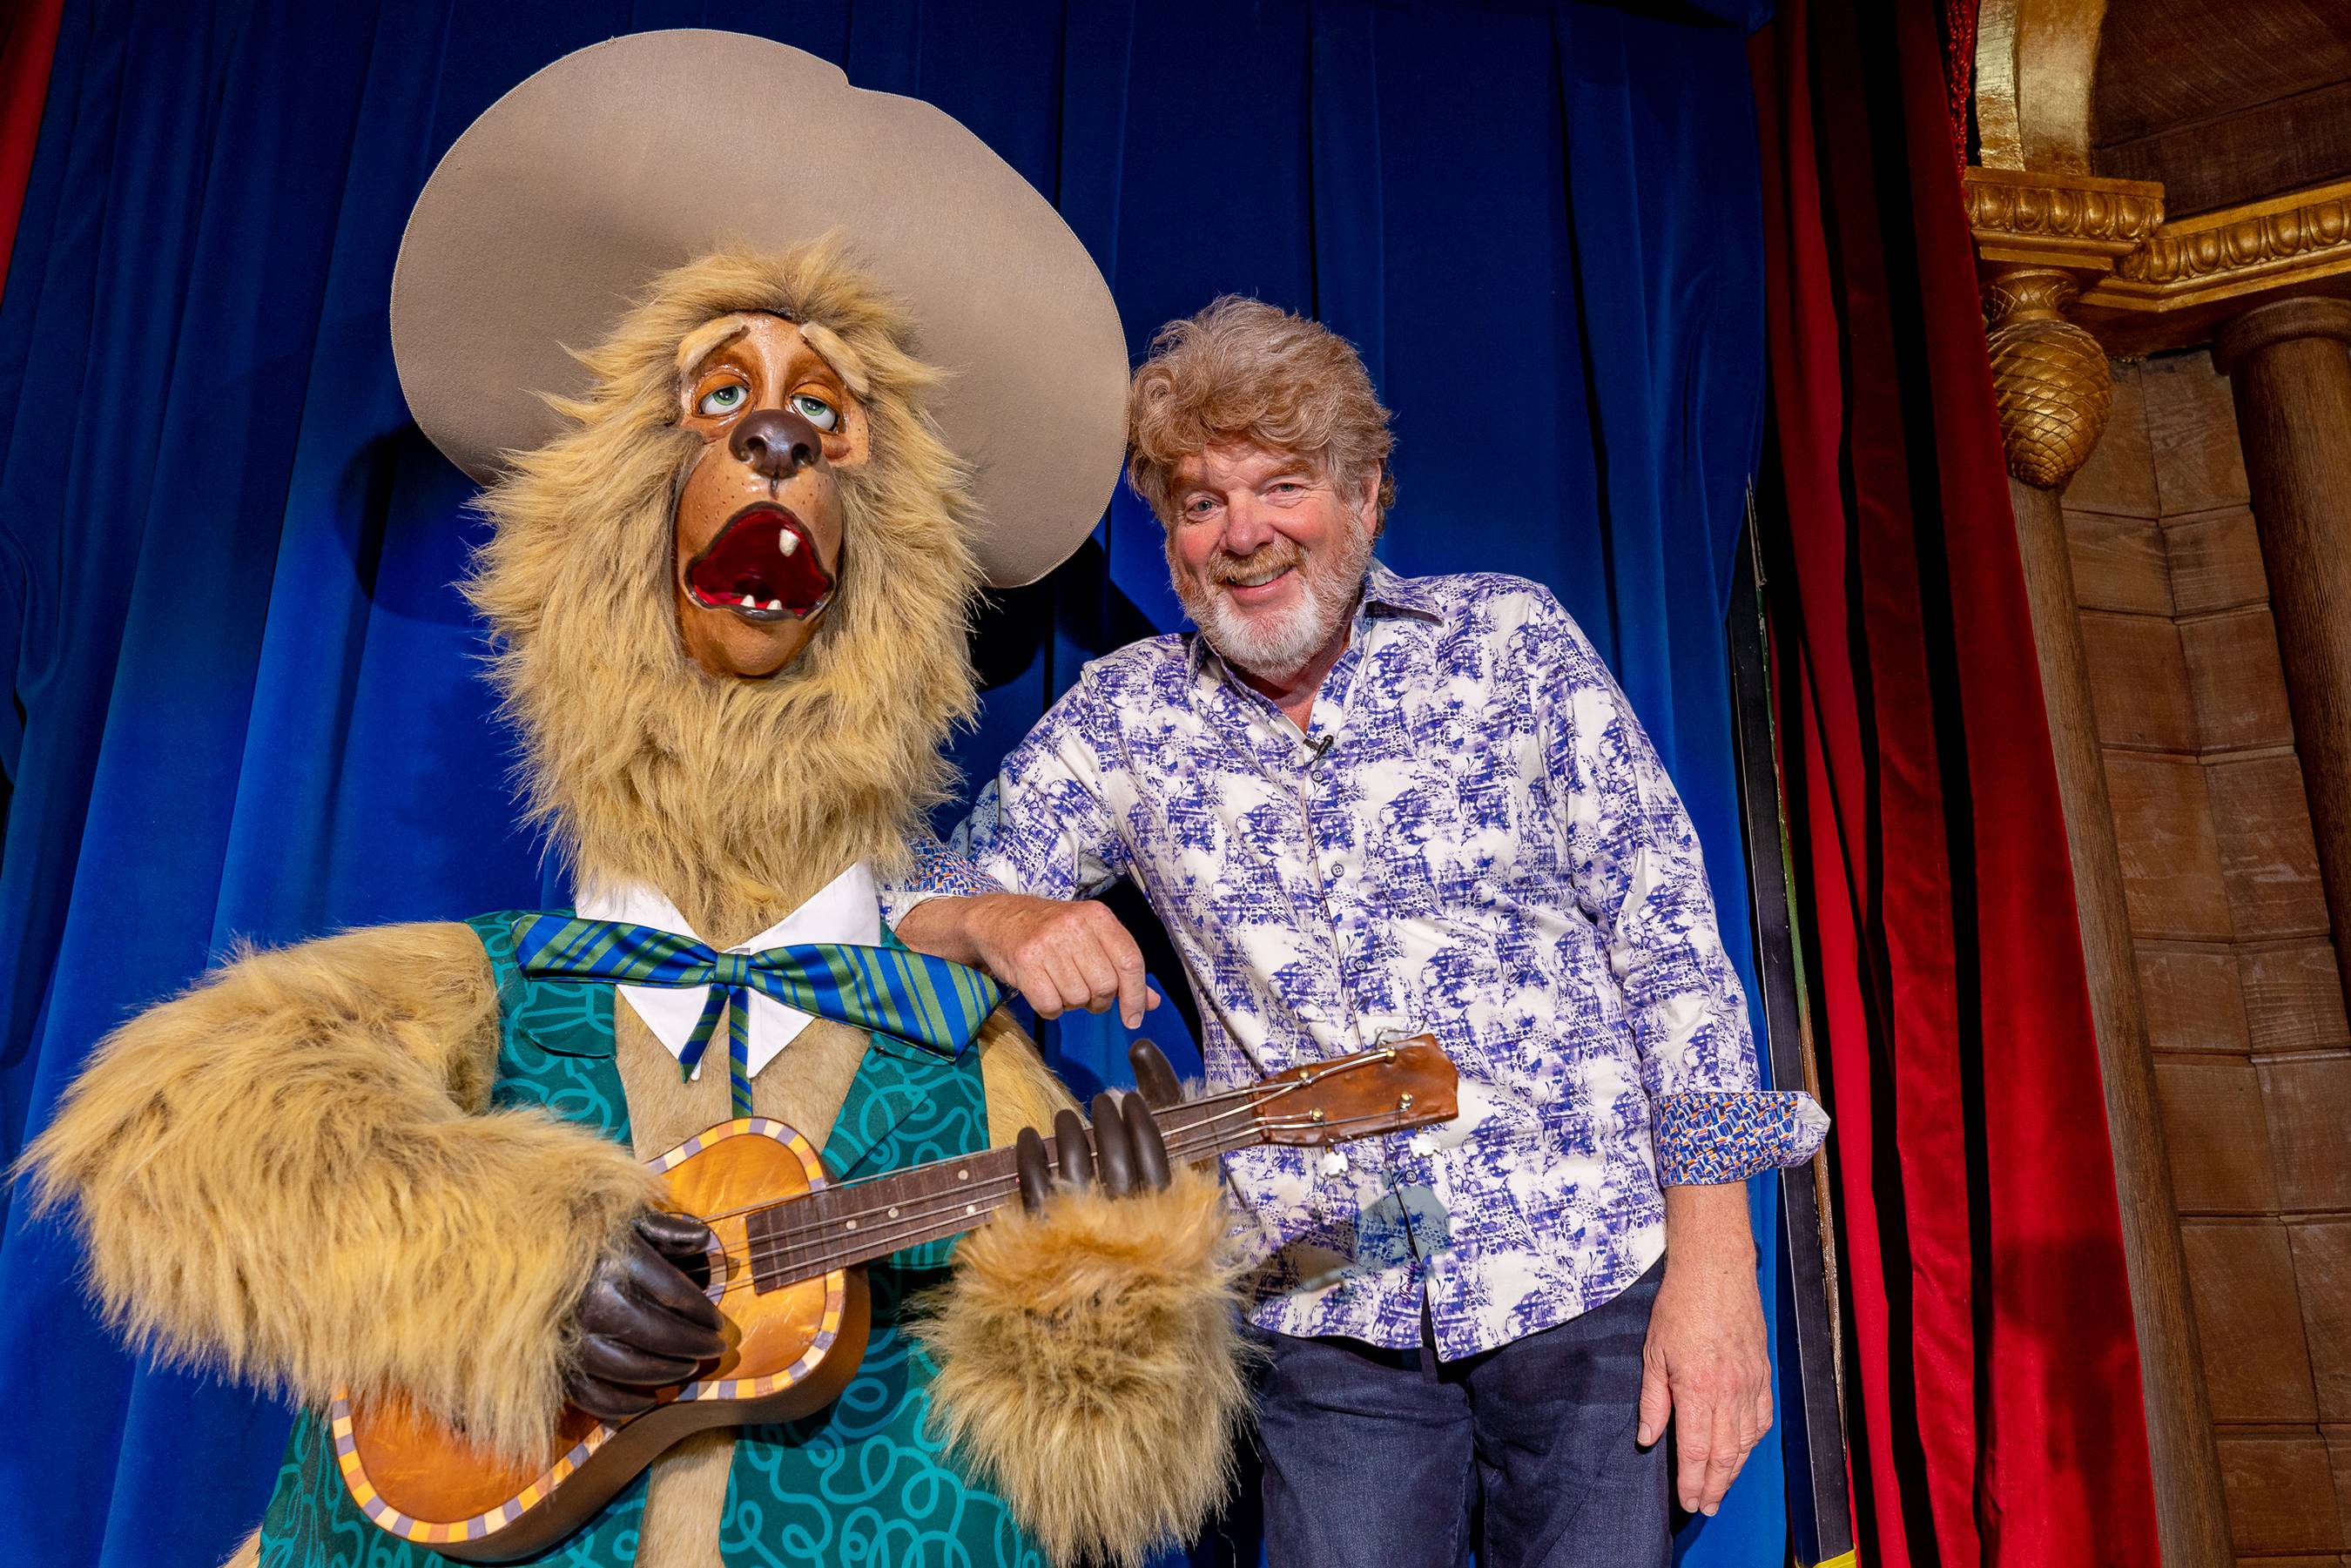 Disney's Country Bear Musical Jamboree Soundtrack To Hit Streaming Services Alongside Show Debut